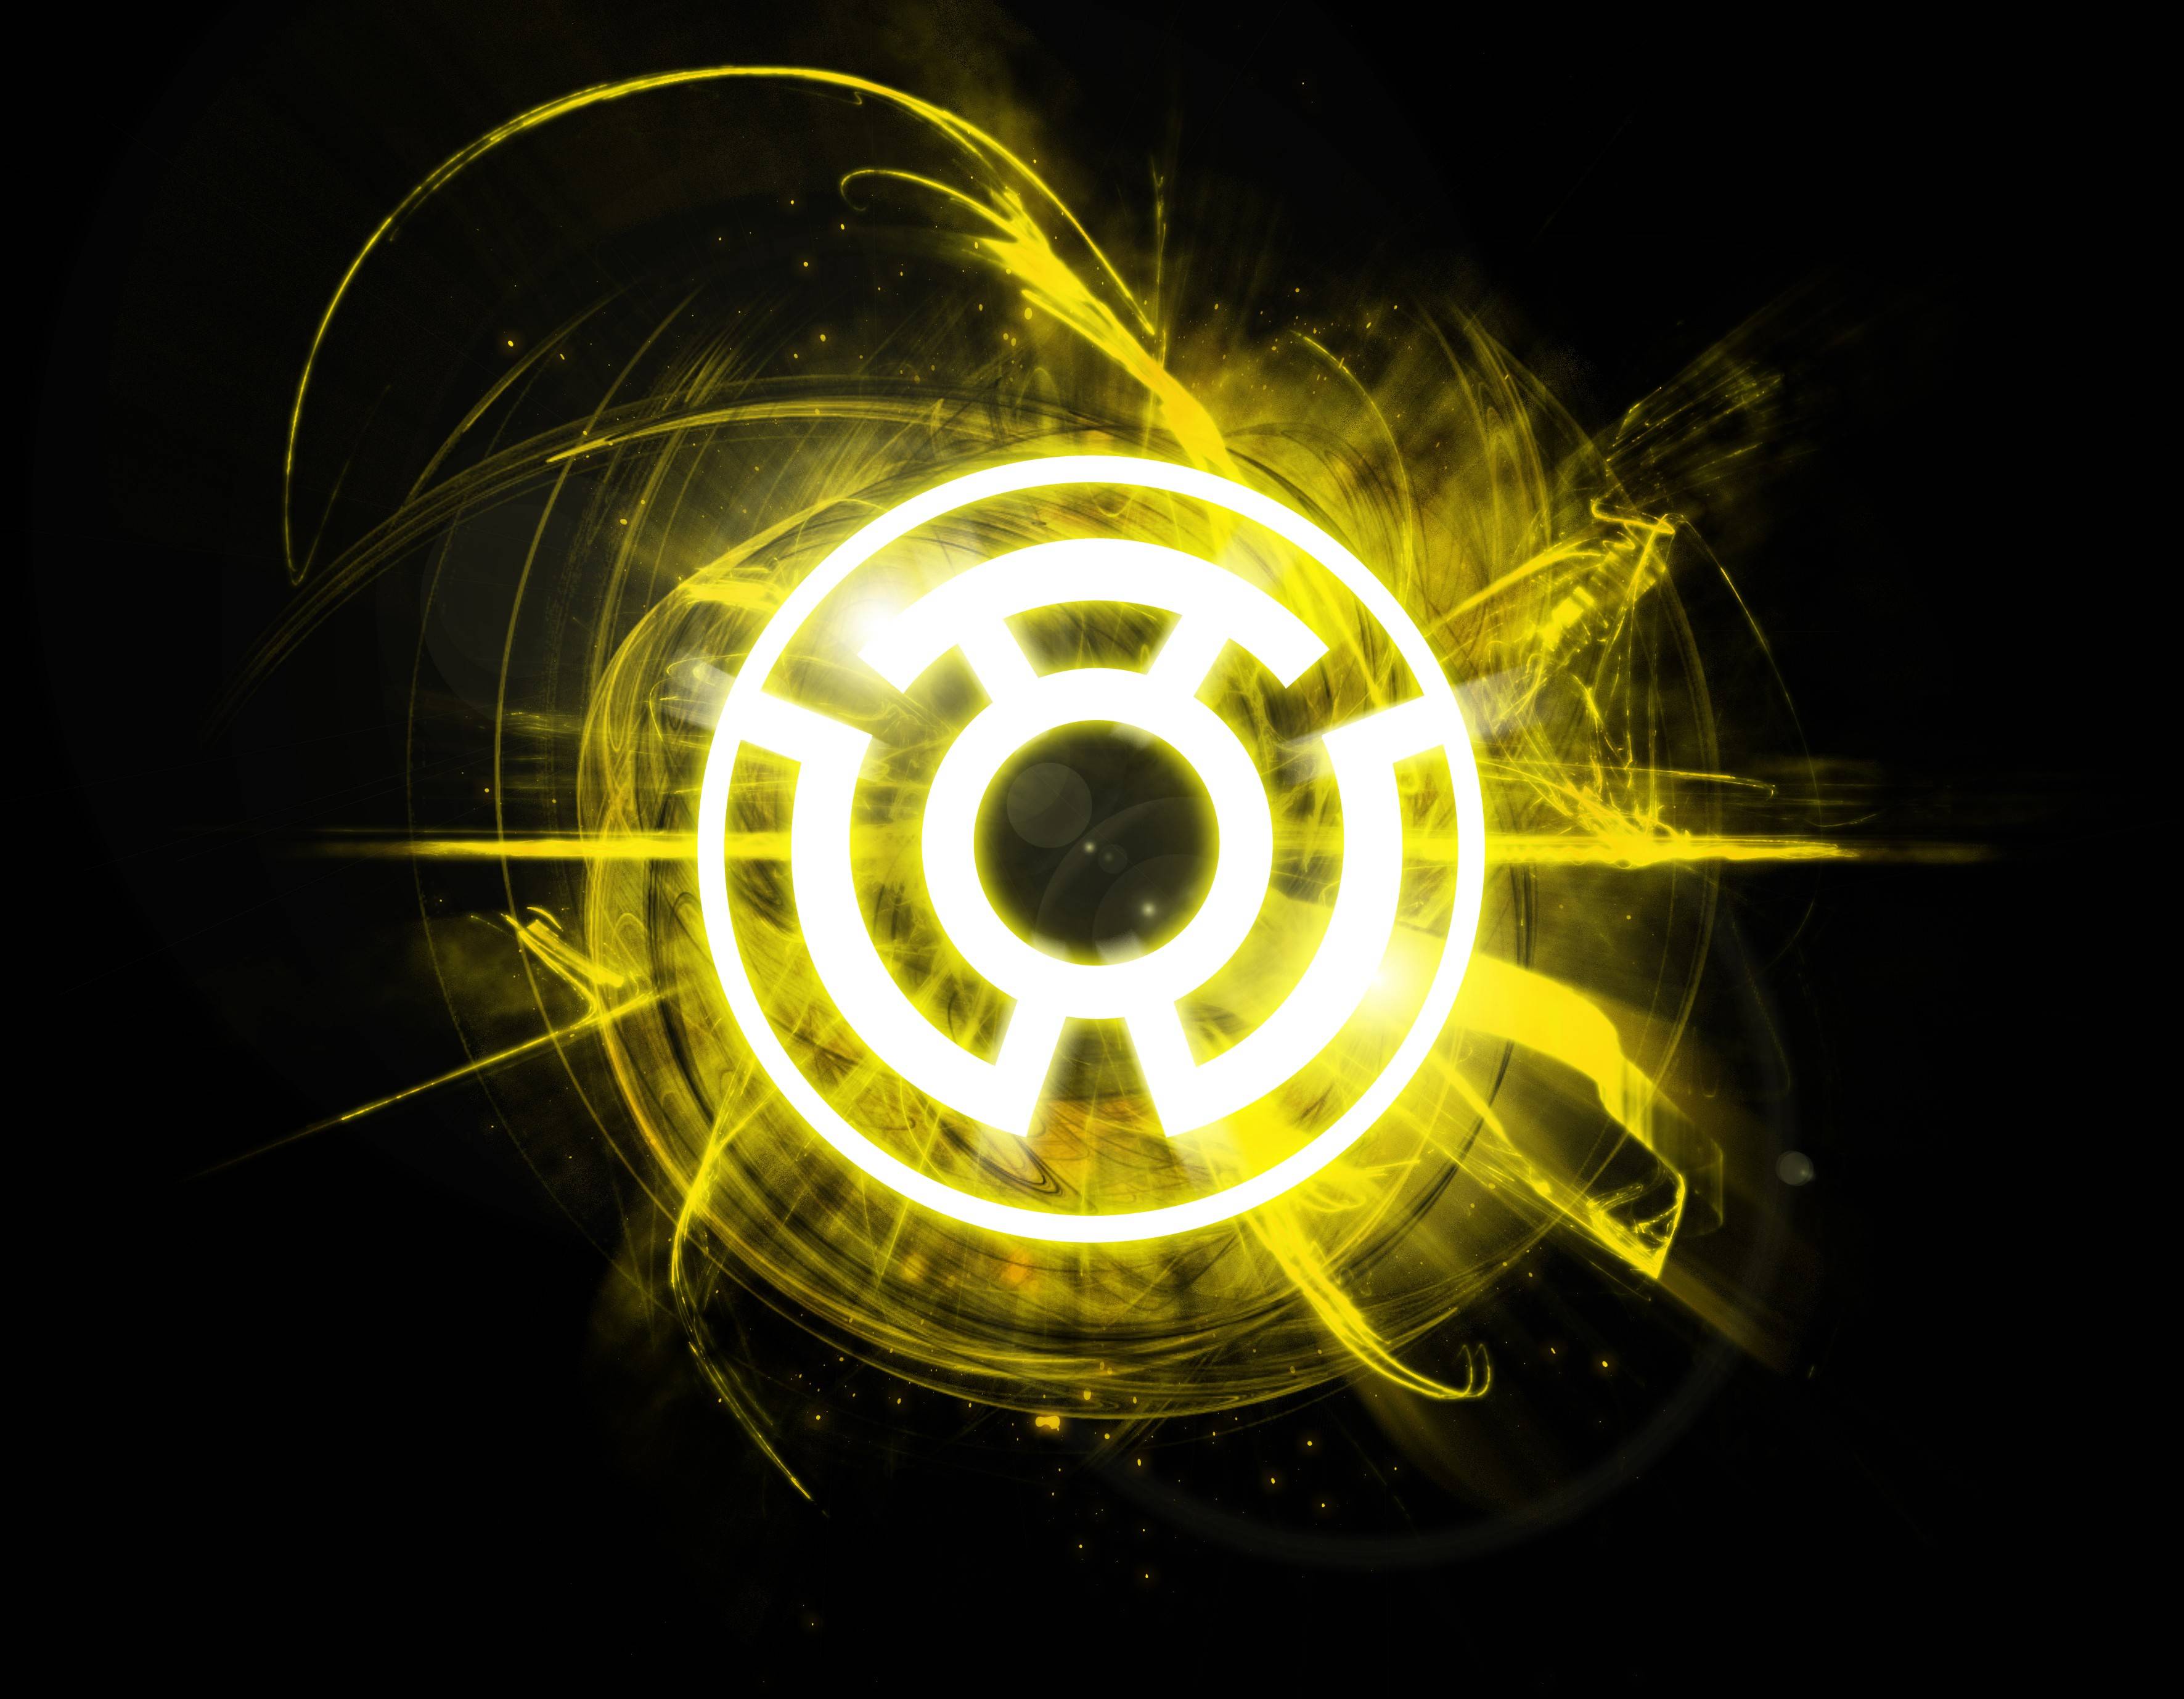 Yellow Lantern Symbol Wallpaper Images Pictures   Becuo 3543x2756